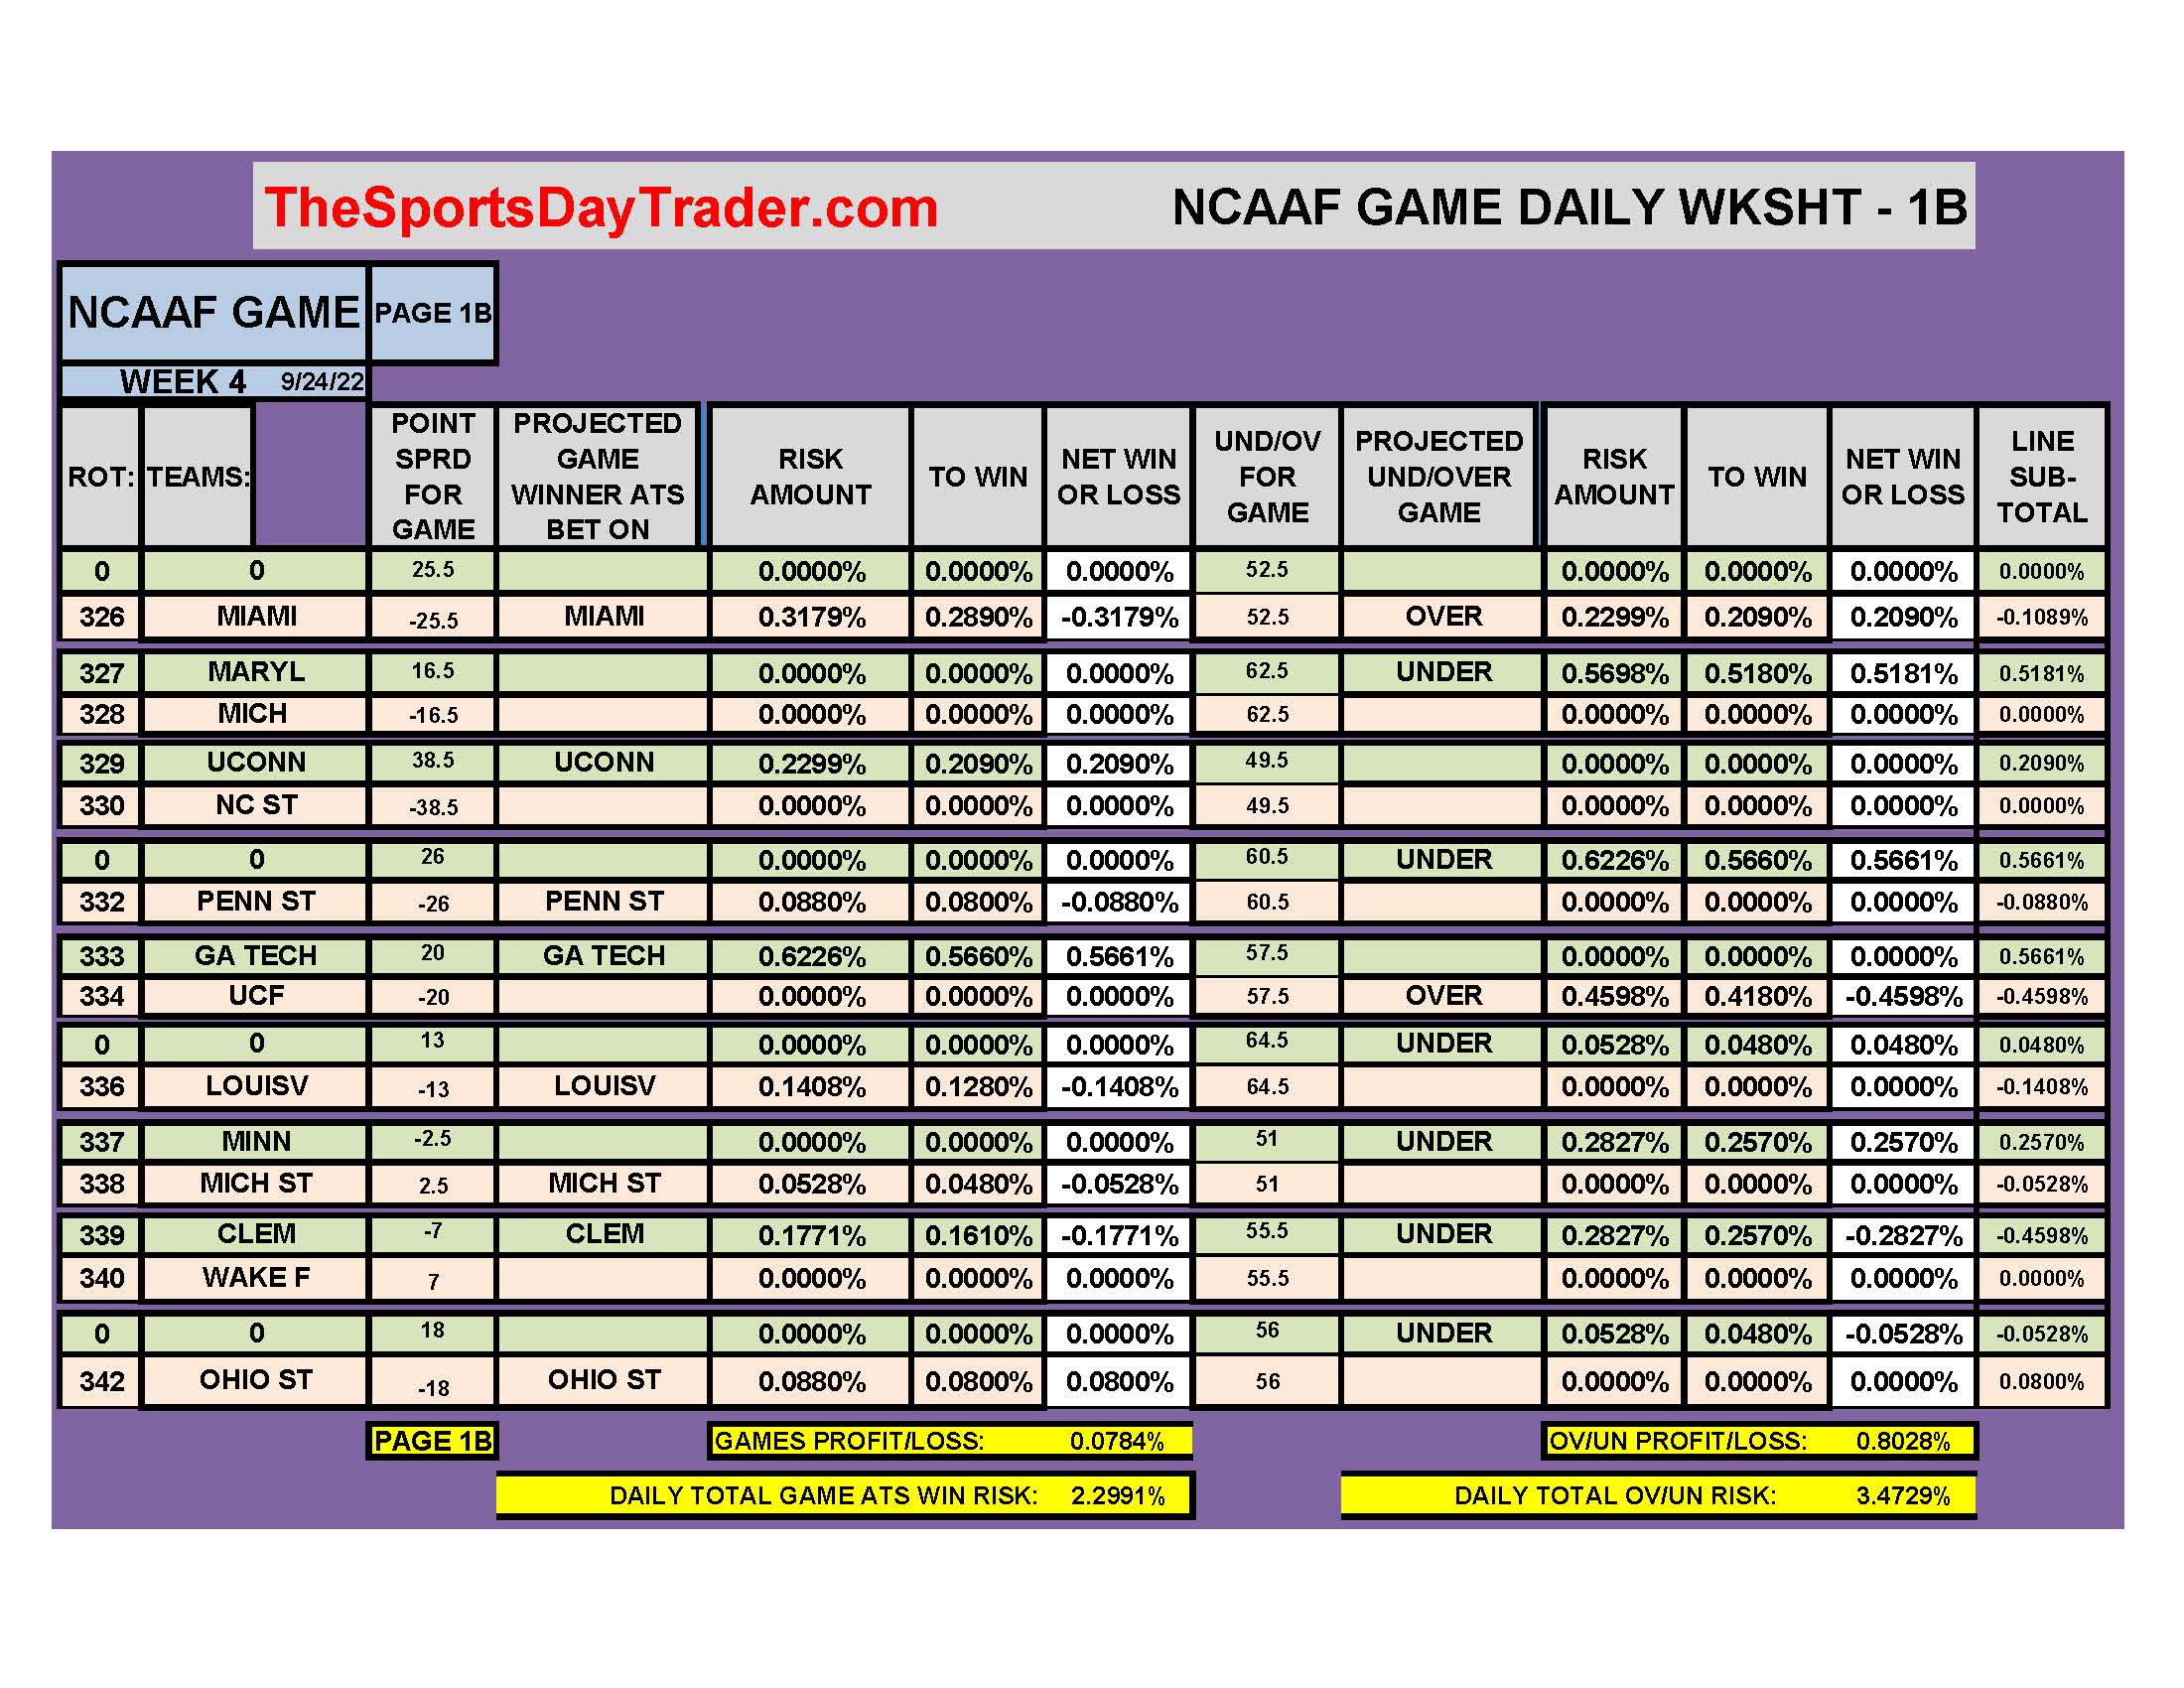 NCAAF 9/24/22 GAME DAILY RESULTS page 1B